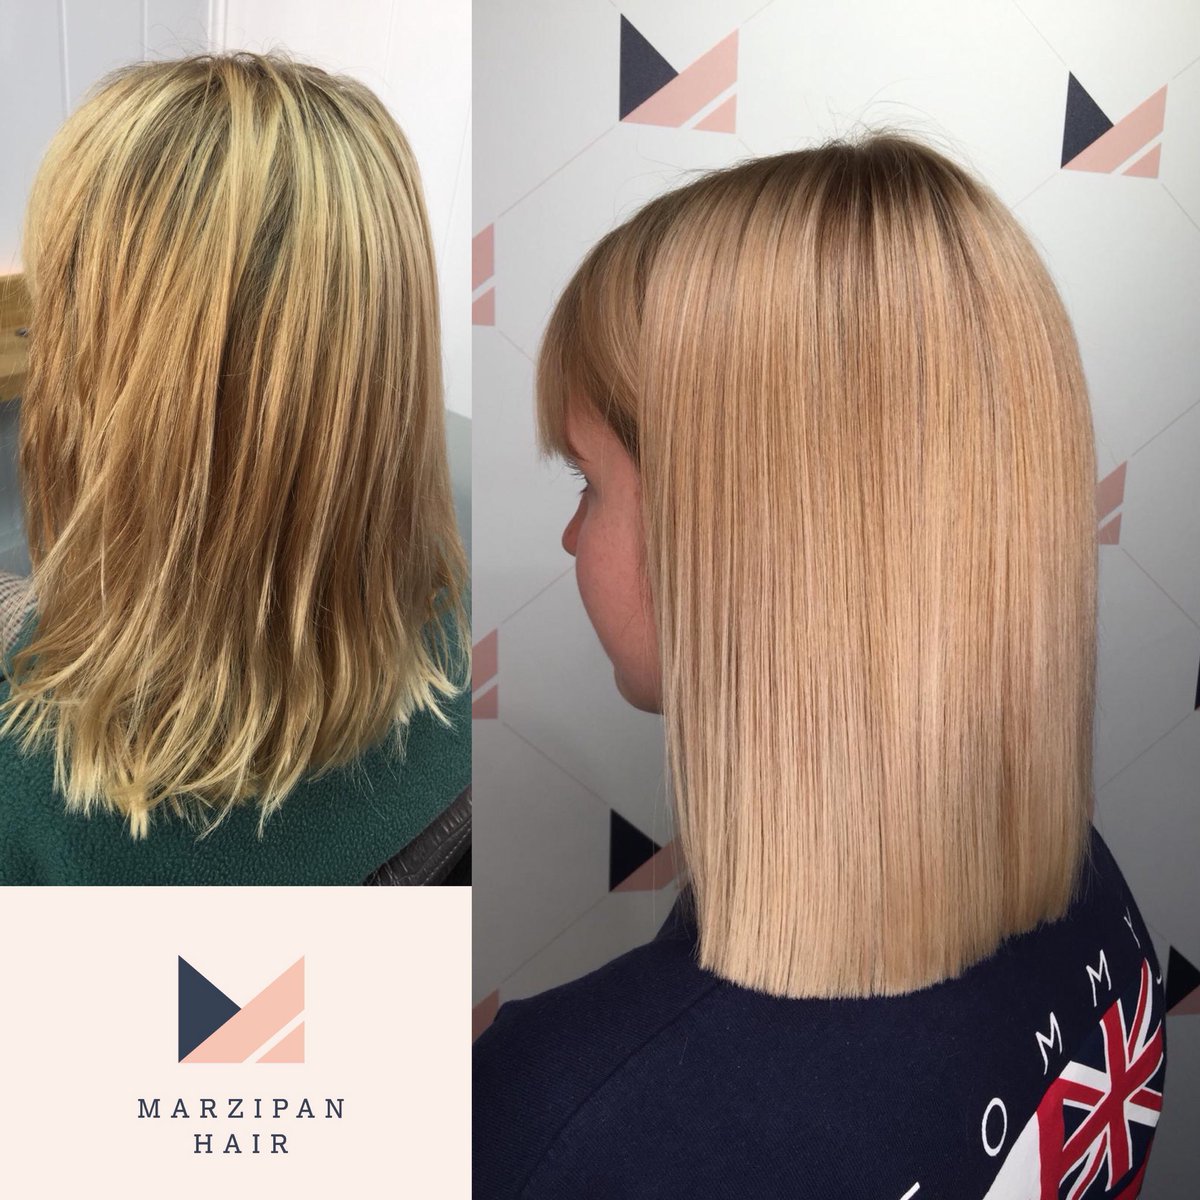 Golden blonde & styled by Daisy.                                                         #redken #marzipanhair #truro #cornwall #goldenblonde #goldenblondehair #trurohairsalon